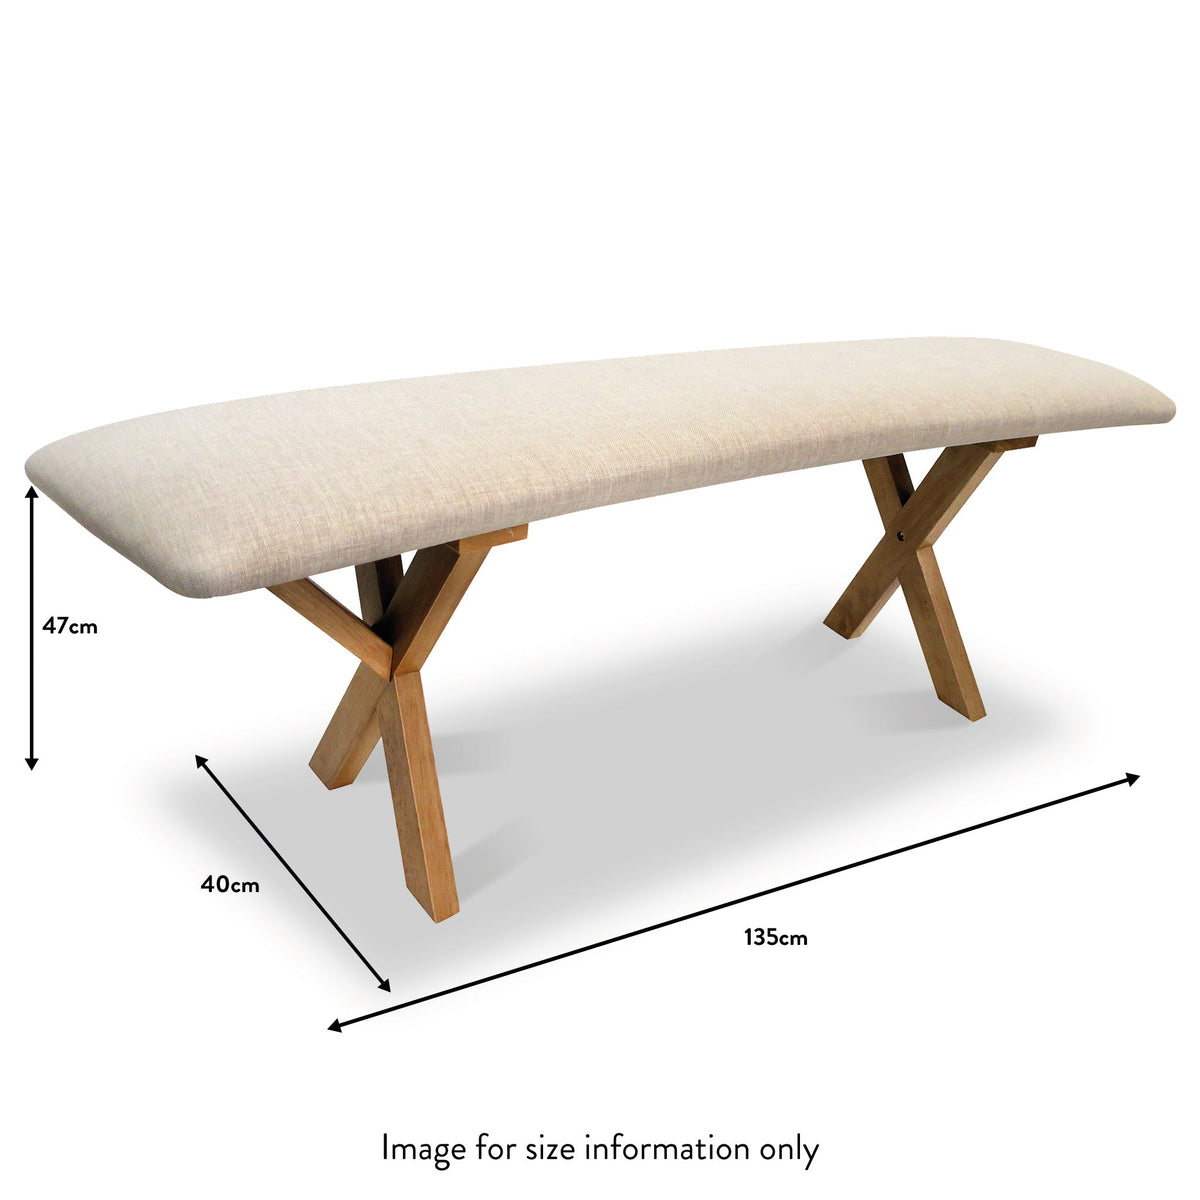 Fabio upholstered dining bench dimensions